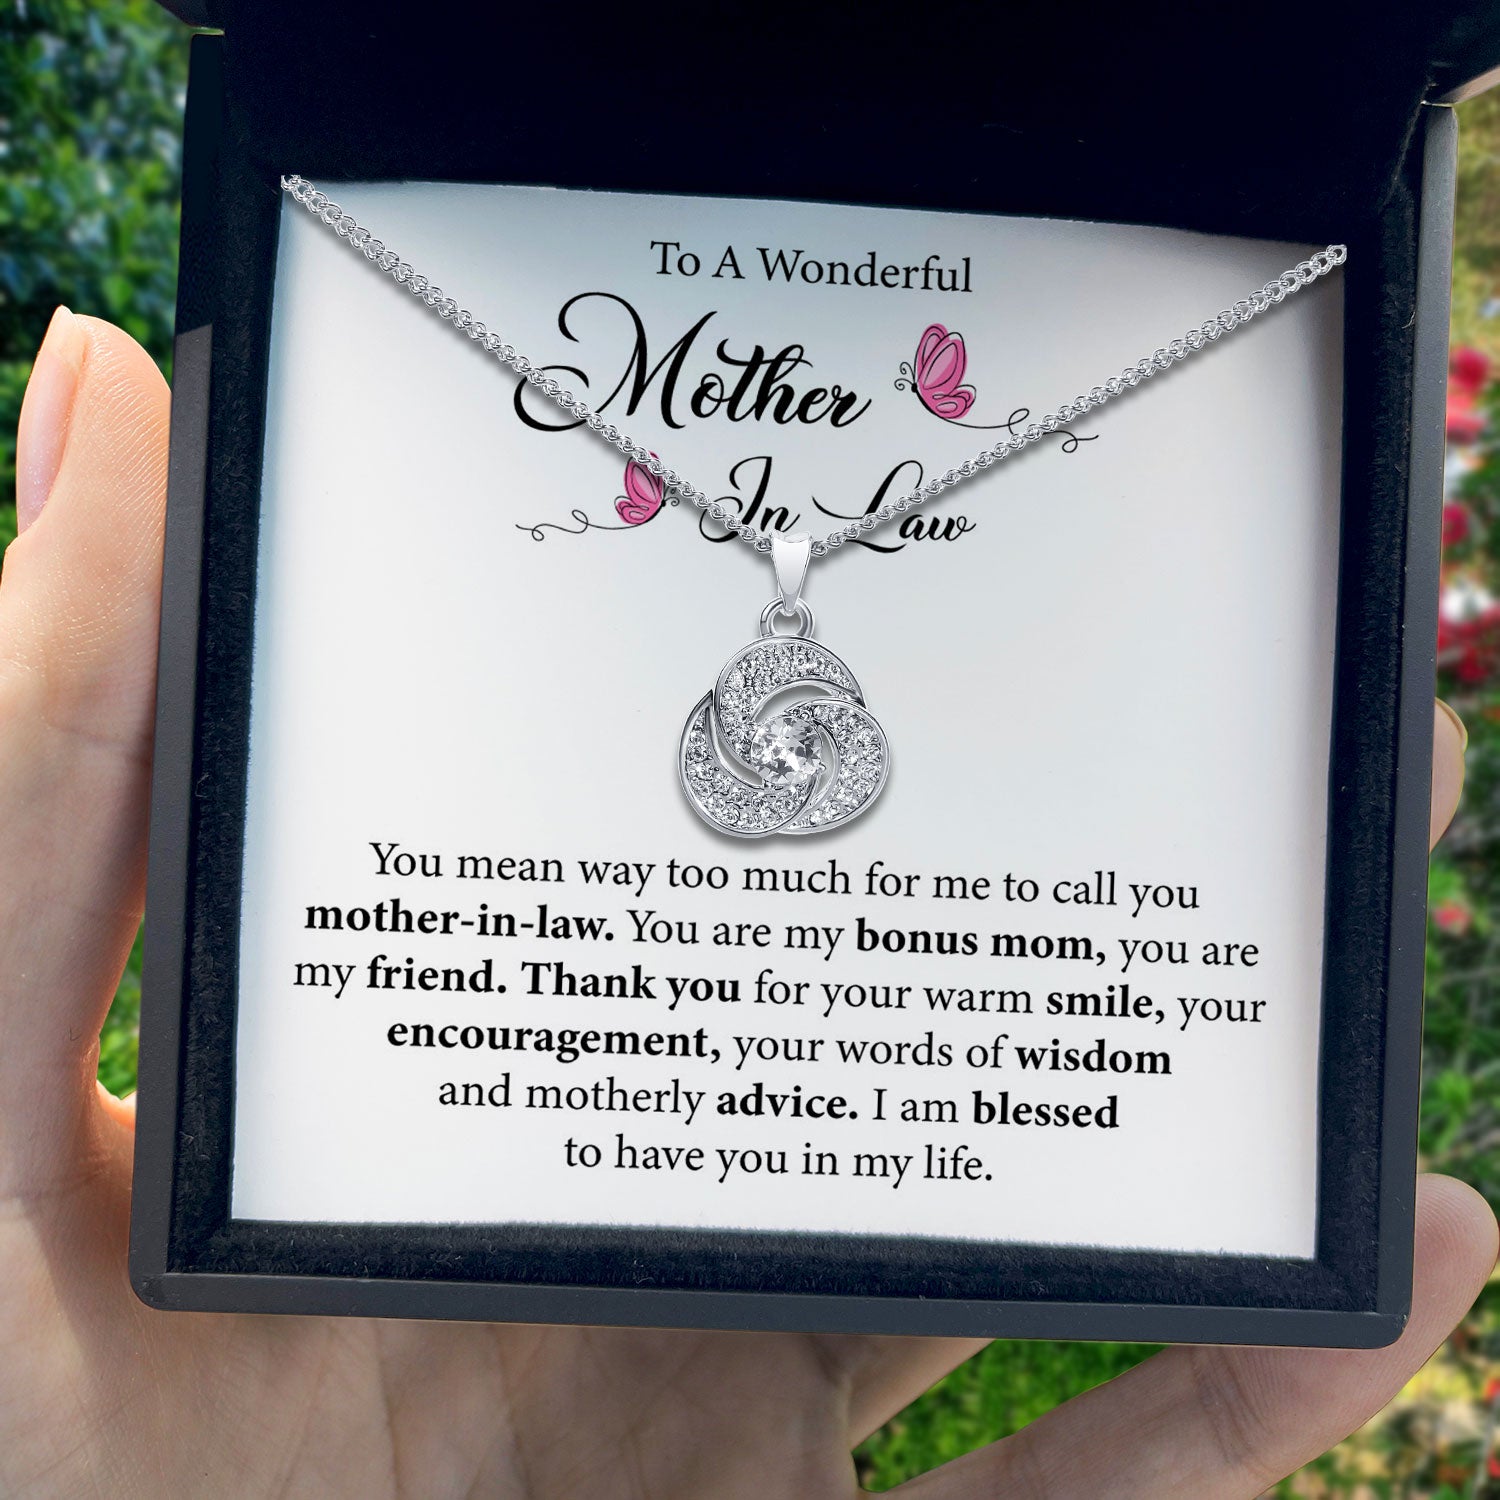 To My Wonderful Mother in Law - You Are My Bonus Mom - Tryndi Love Knot Necklace